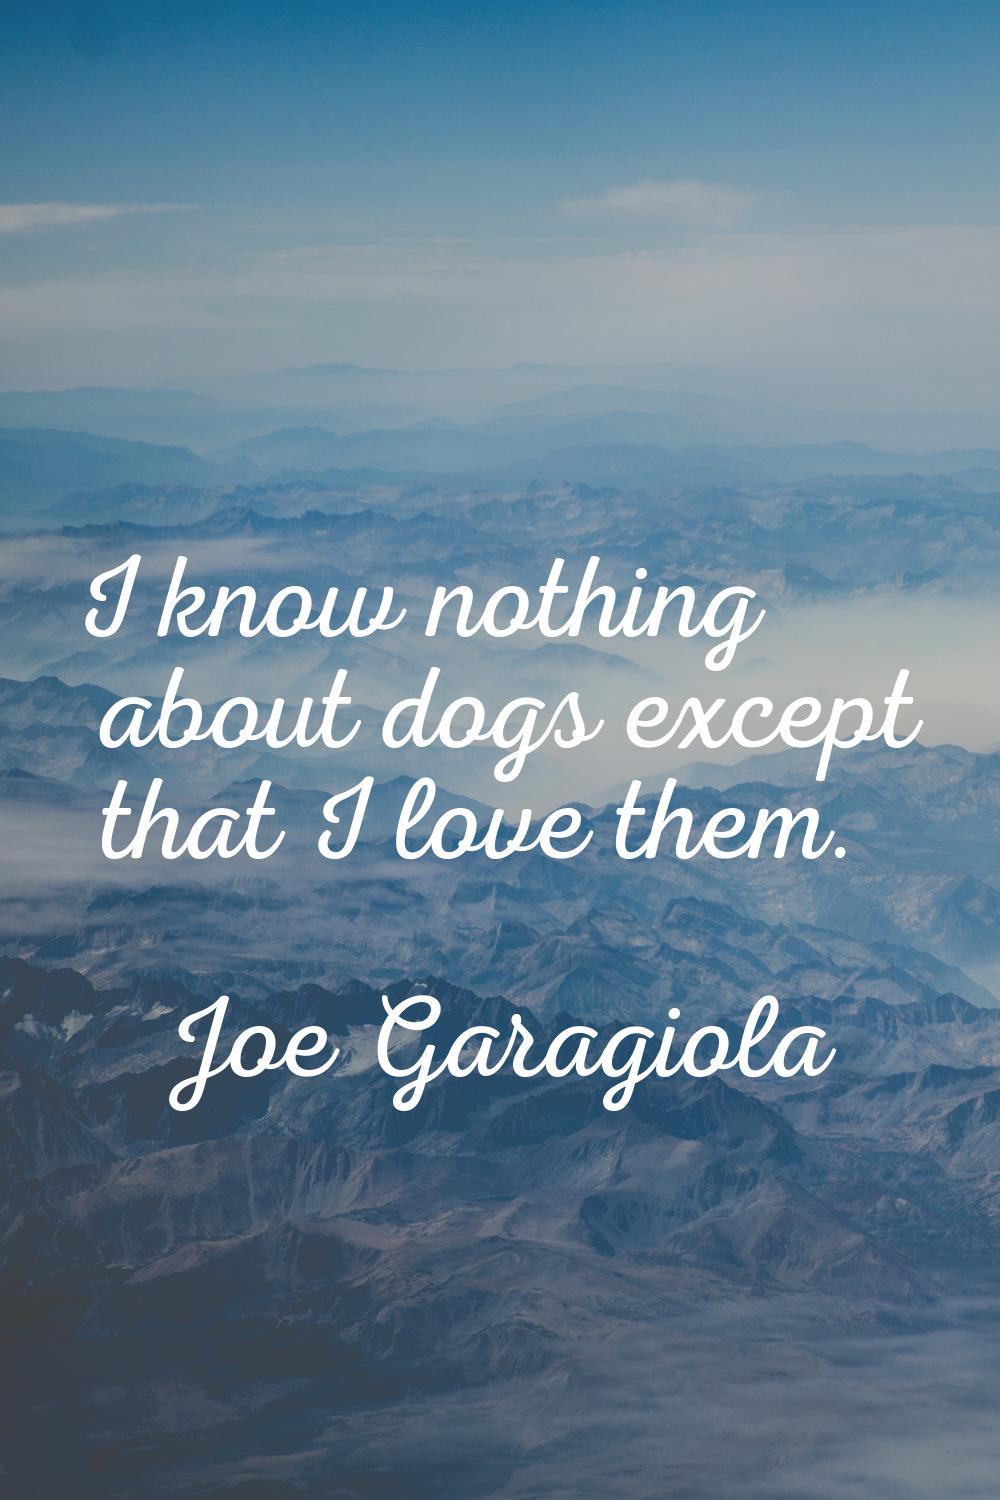 I know nothing about dogs except that I love them.